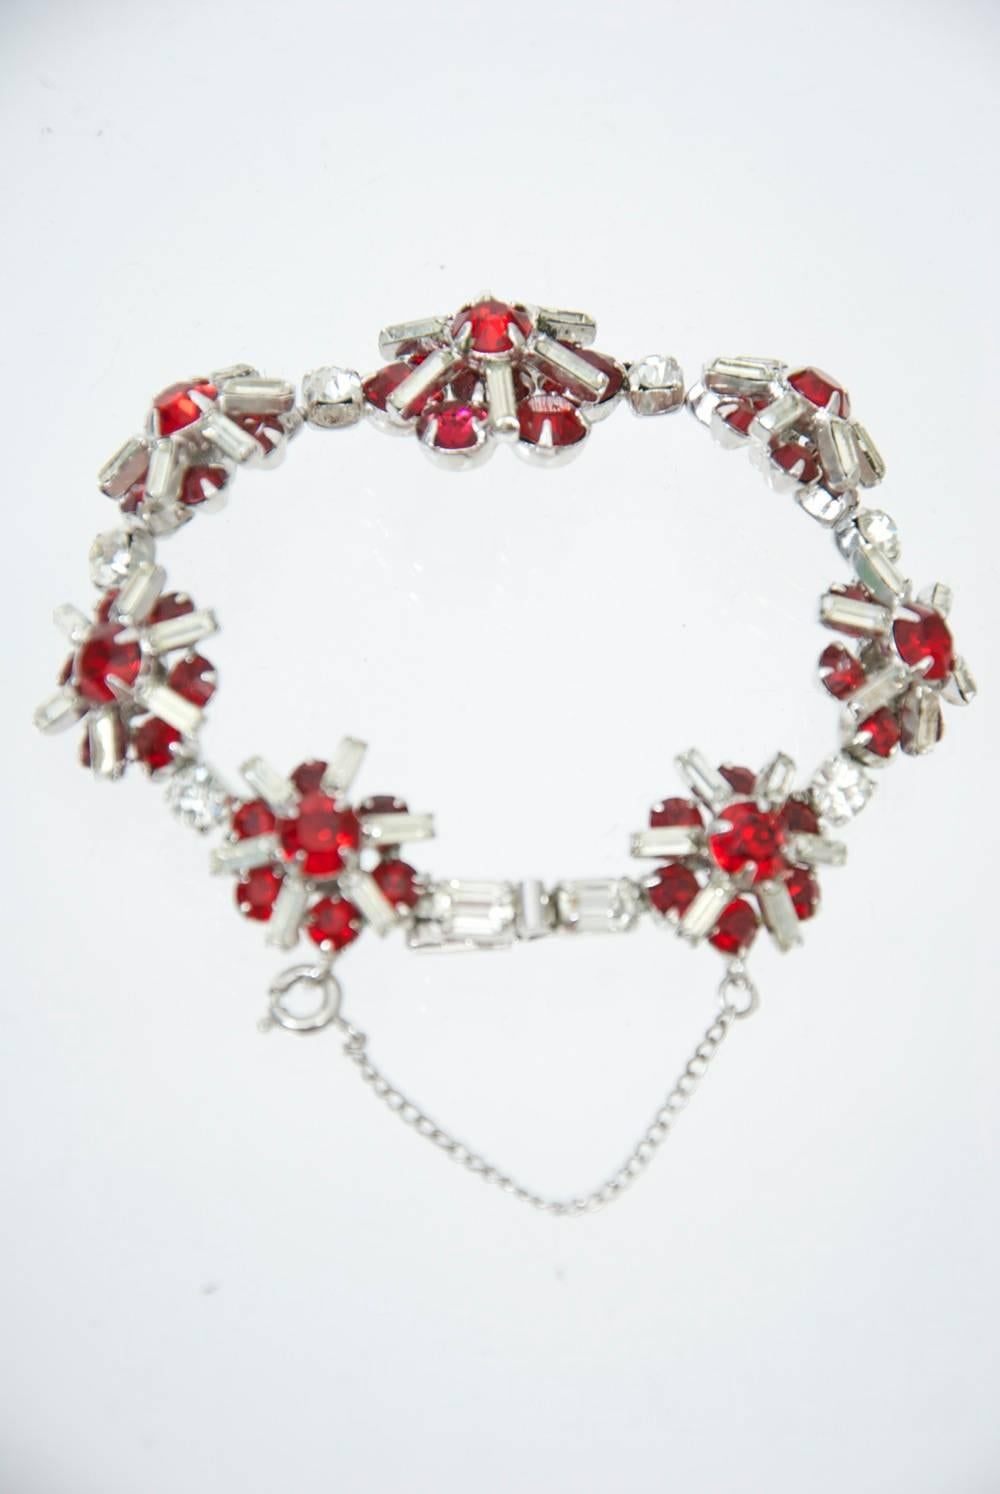 Kramer vintage costume bracelet composed of ruby and rhinestone crystal florets, a larger one in center, connected by a single rhinestone in between each floret. Safety chain.